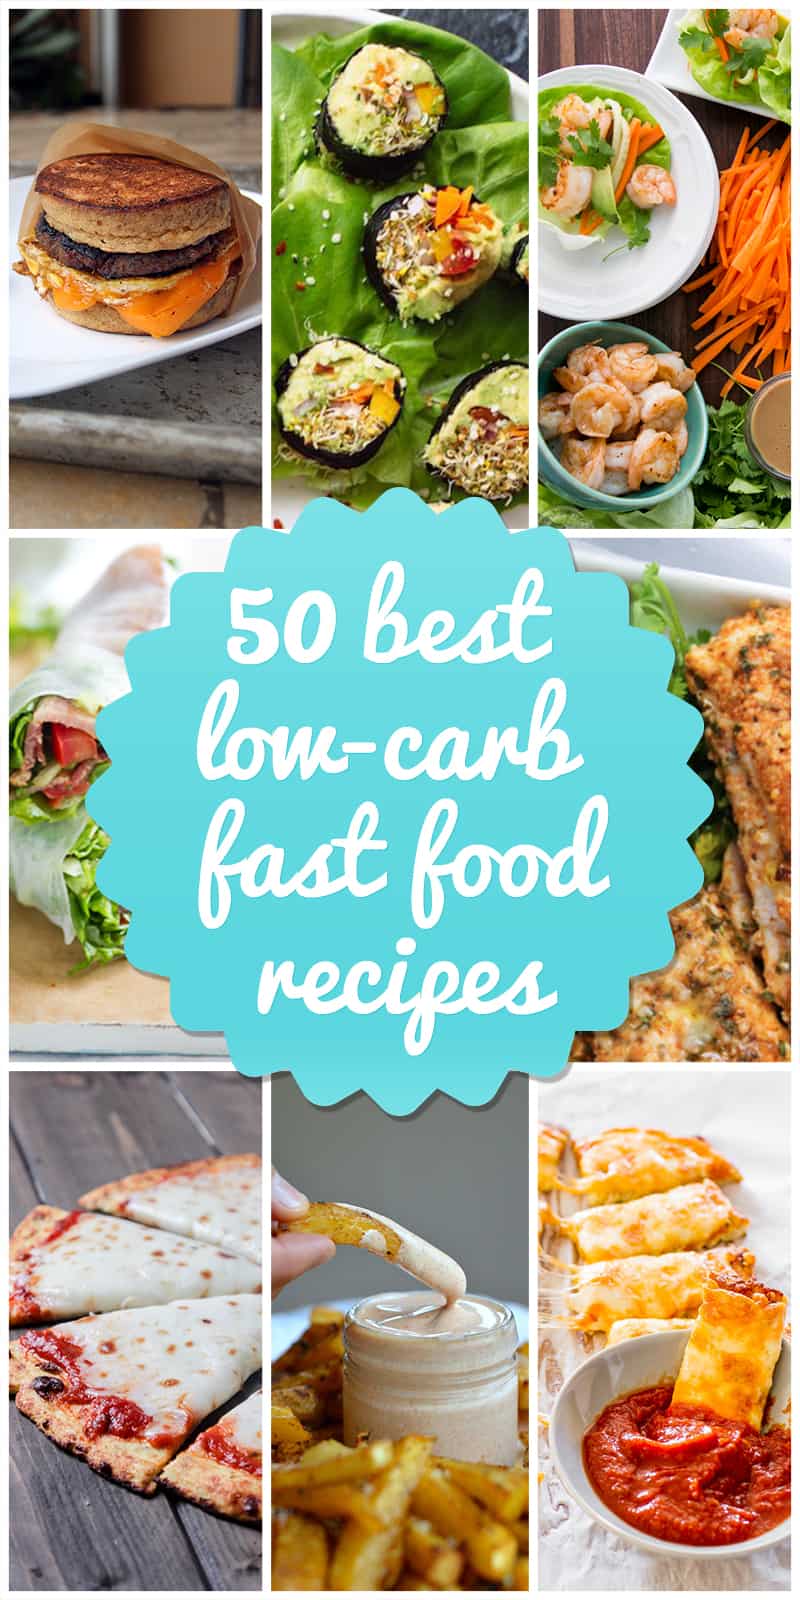 50 Best Low-Carb Fast Food Options (Recipes And Ideas)